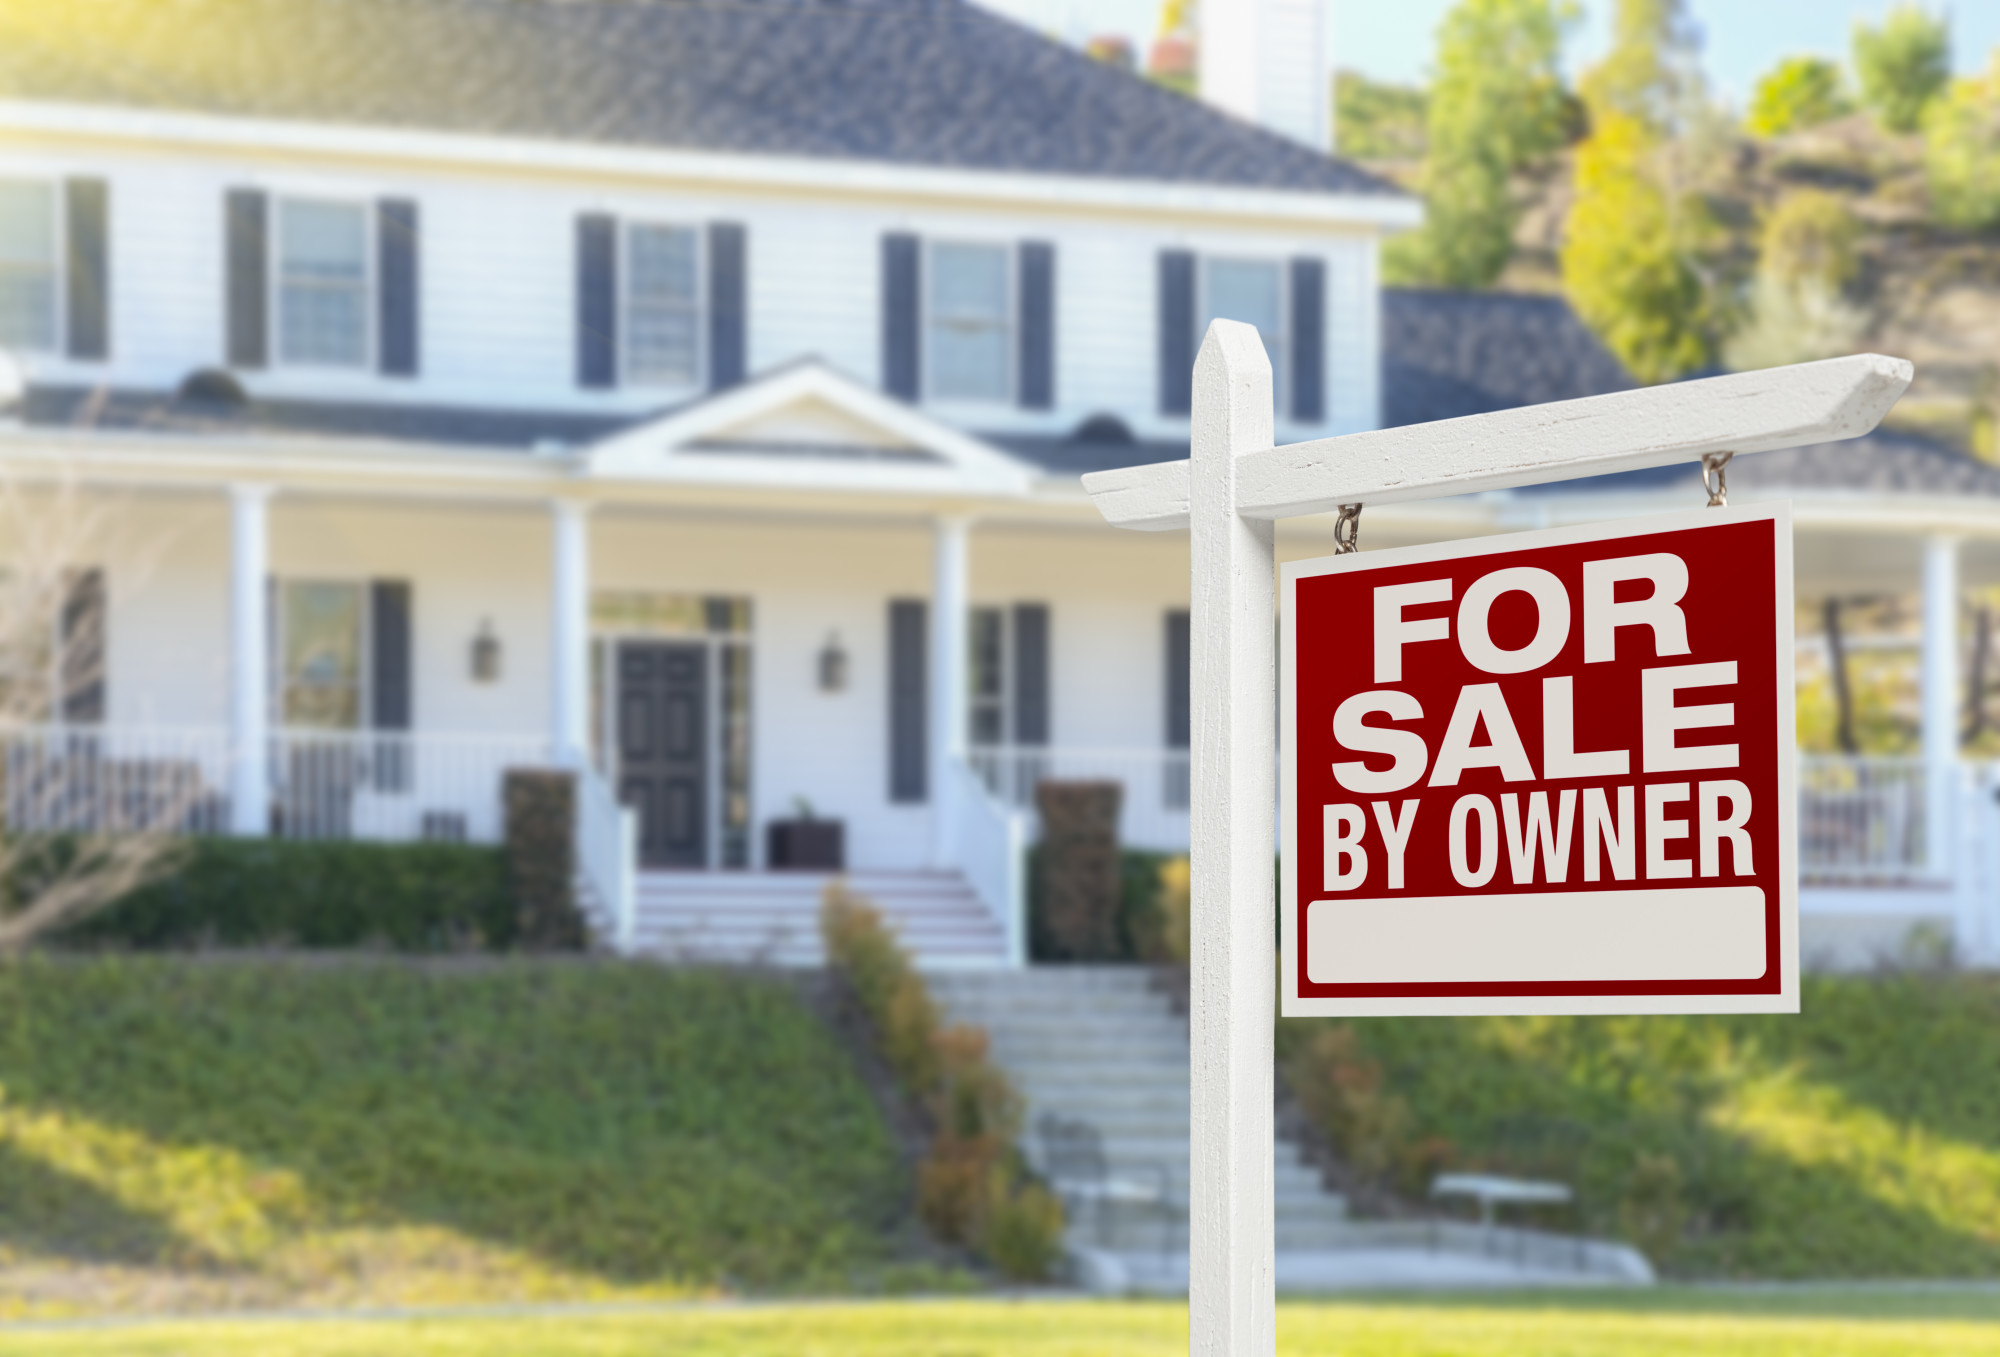 5 Convenient Reasons To Sell Your Property to All Cash Buyers